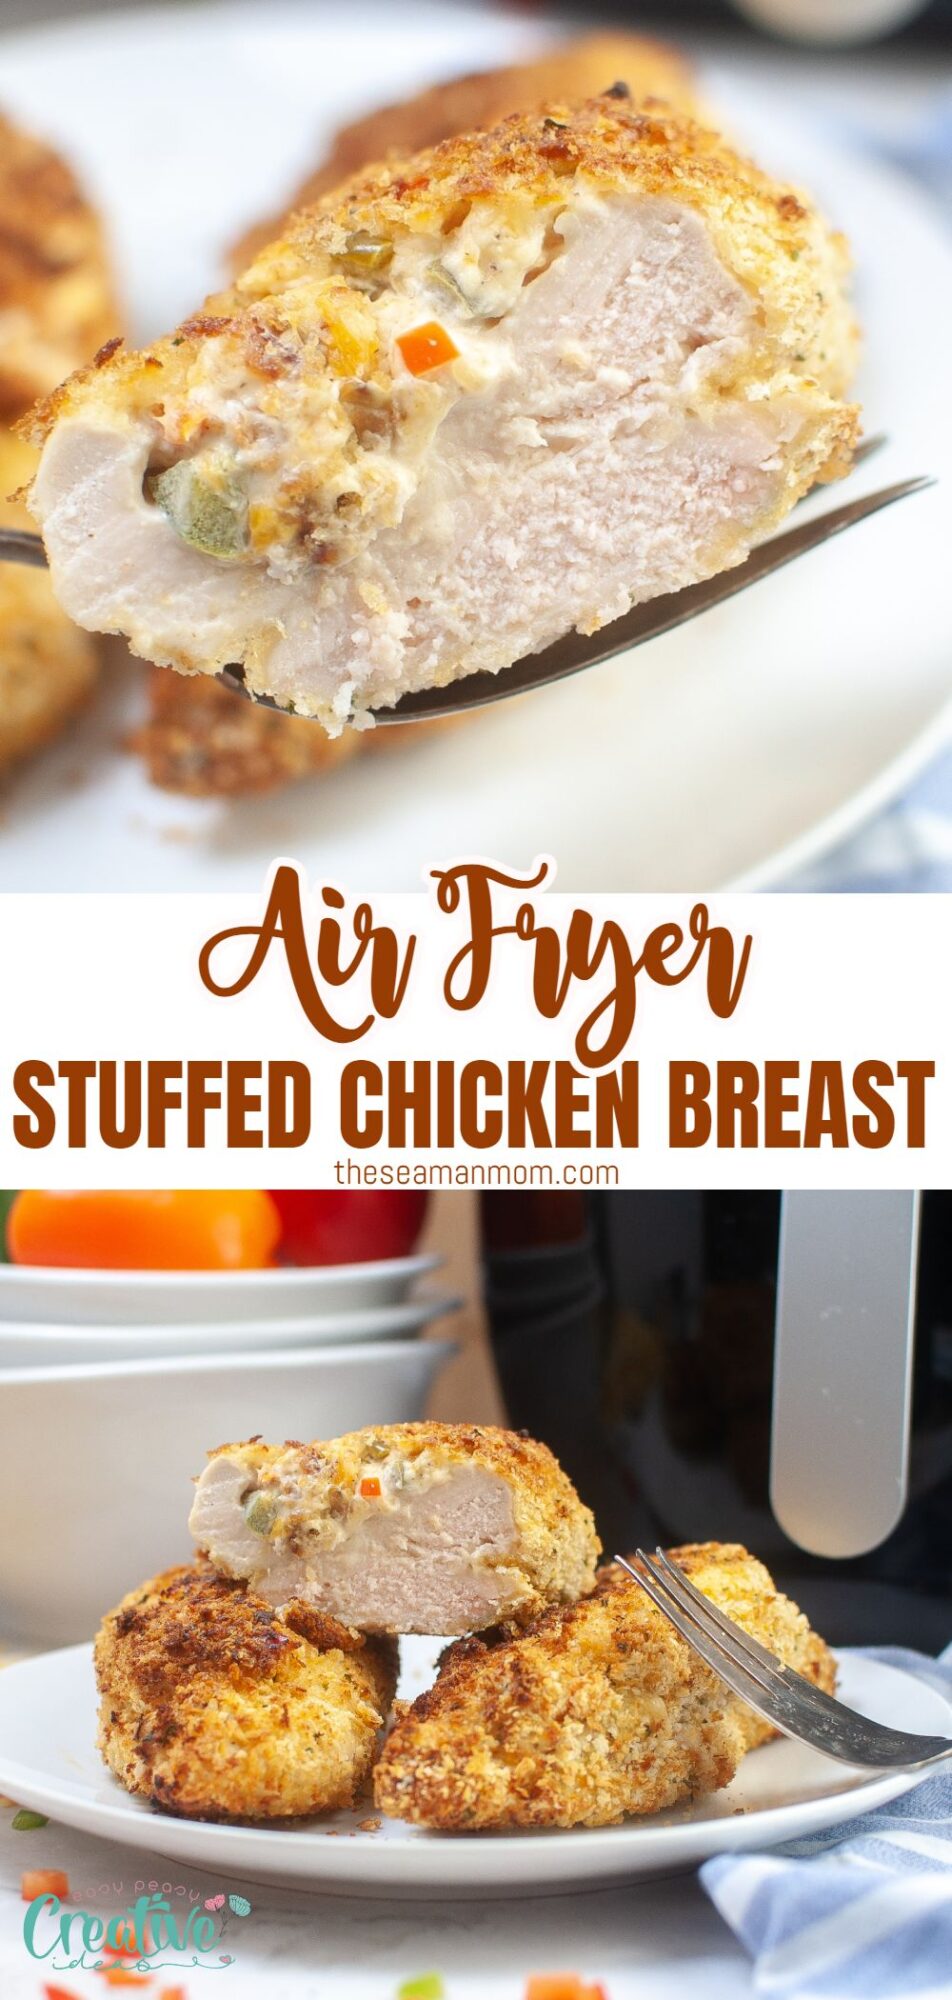 Delicious air fryer stuffed chicken breast, a perfect blend of juicy chicken, savory stuffing, and crispy coating.